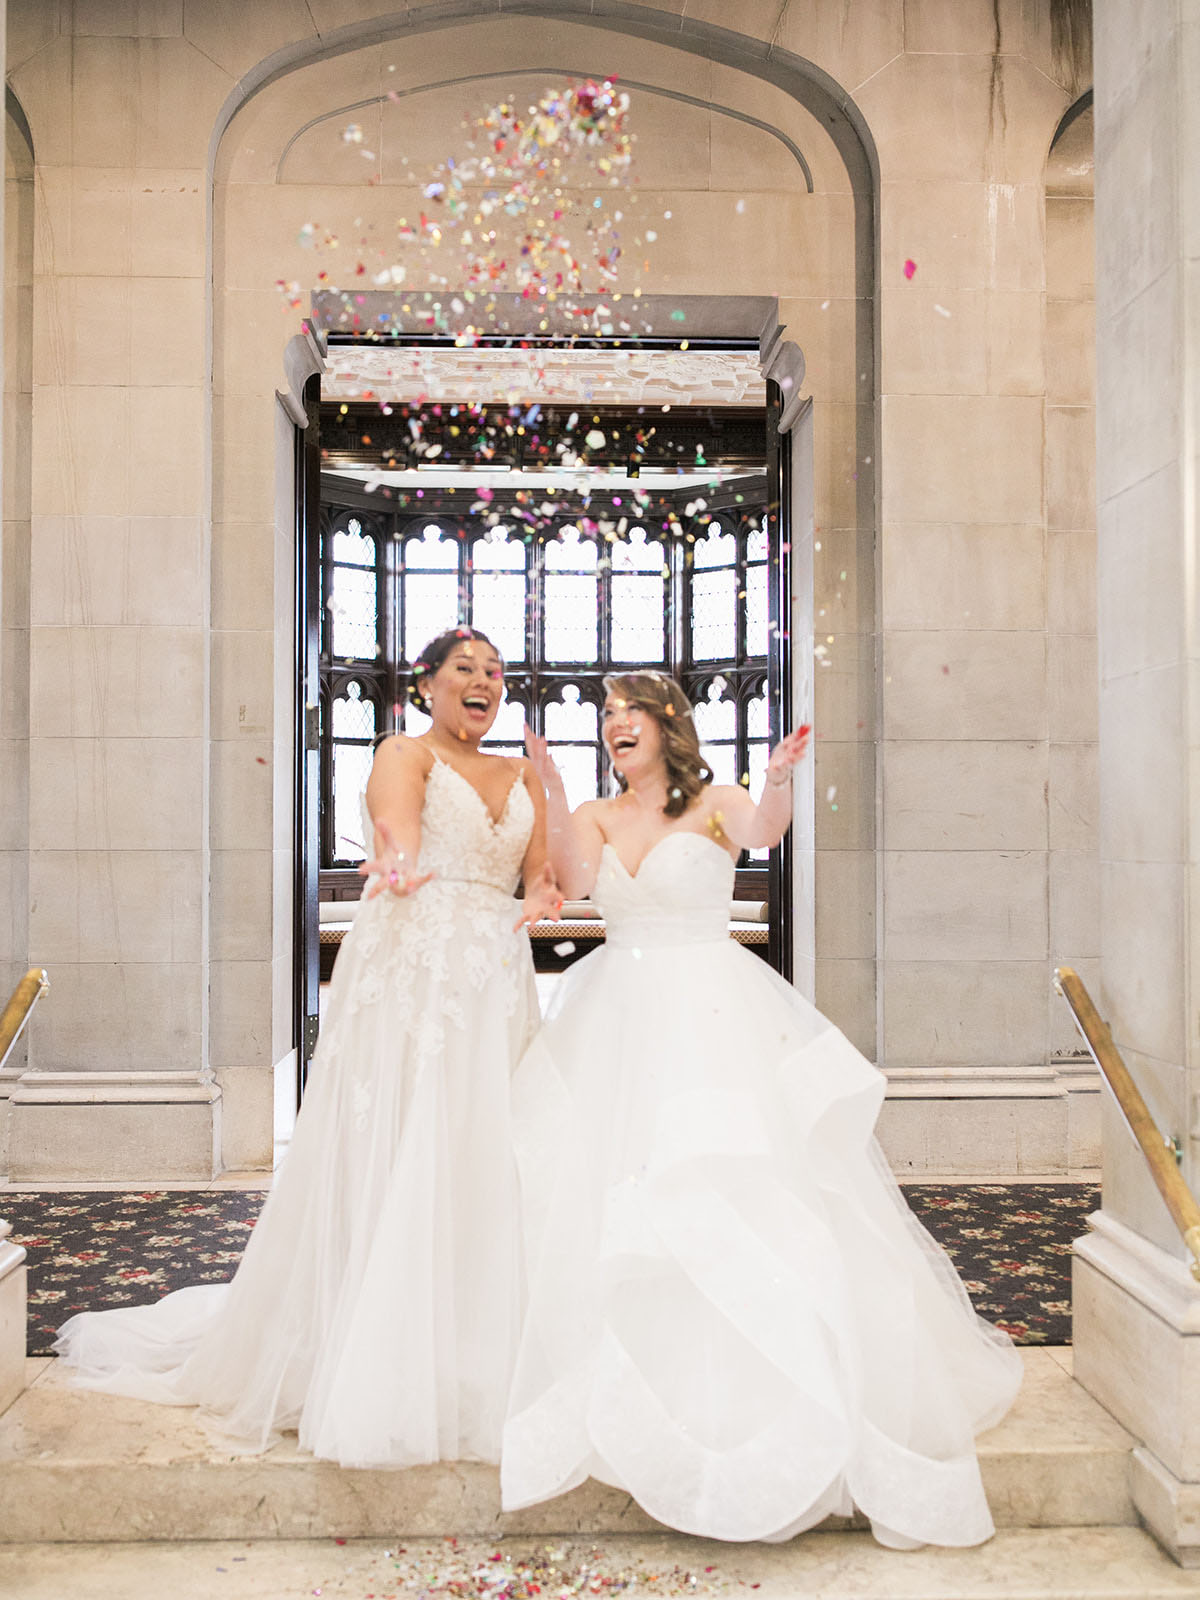 This romantic spring castle wedding is fit for a princess—or two two brides white lace dresses florals crystals diamonds glitter